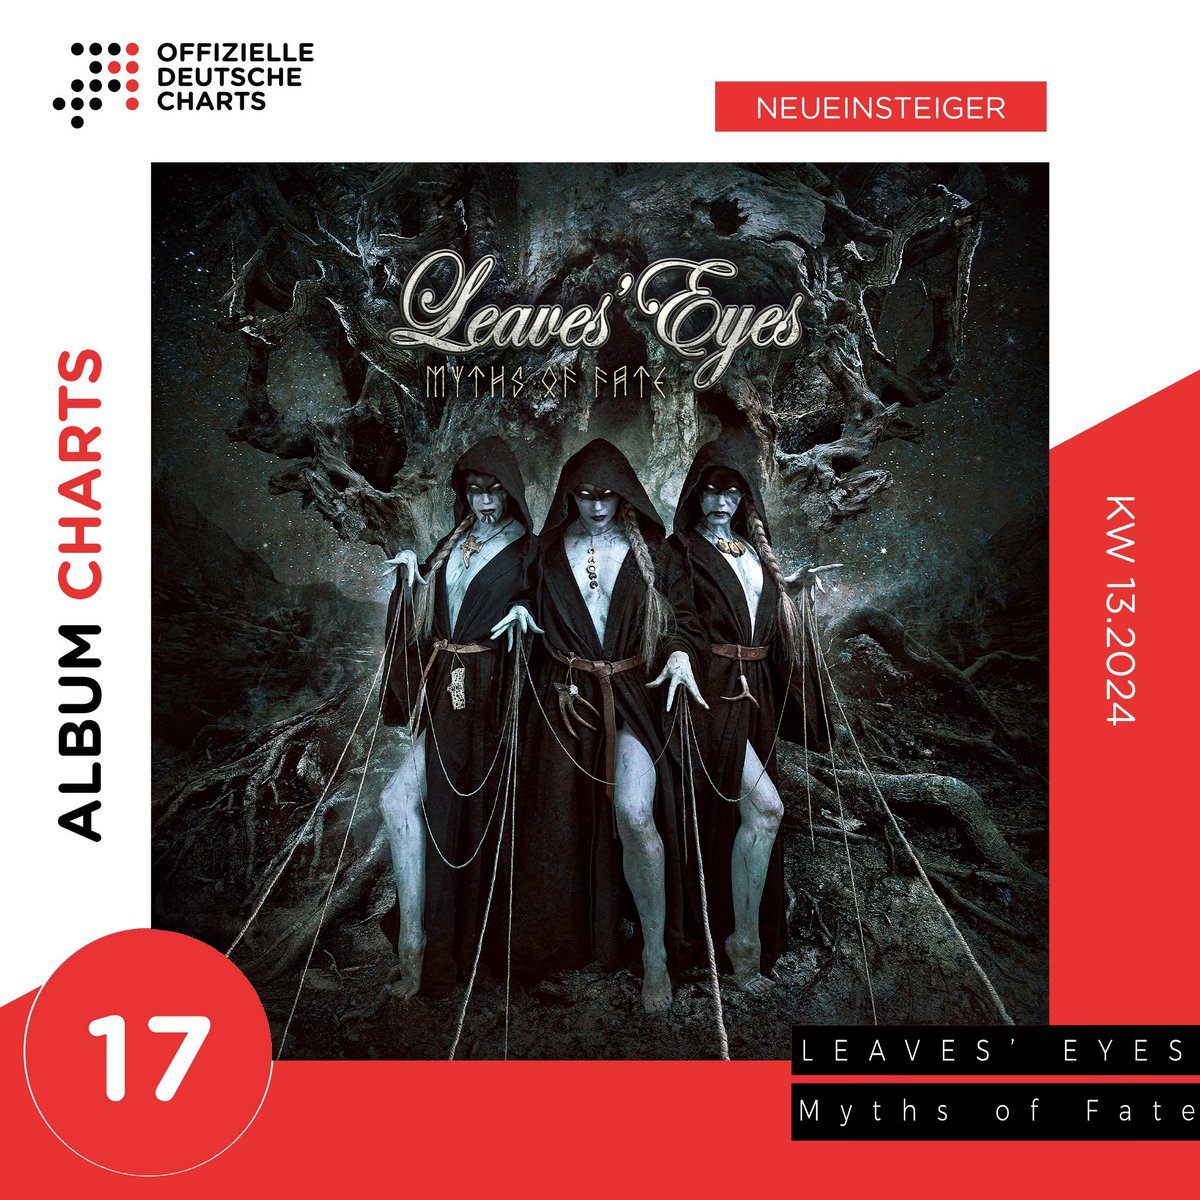 FANTASTIC news! After amazing shows with our new record we are happy to announce MYTHS OF FATE has entered the Official German Album Charts on #17! 🇩🇪🇩🇪 A HUGE thank you to our fans for the great support and see you soon at the shows in Hamburg and Berlin! 🤘🇩🇪🤘